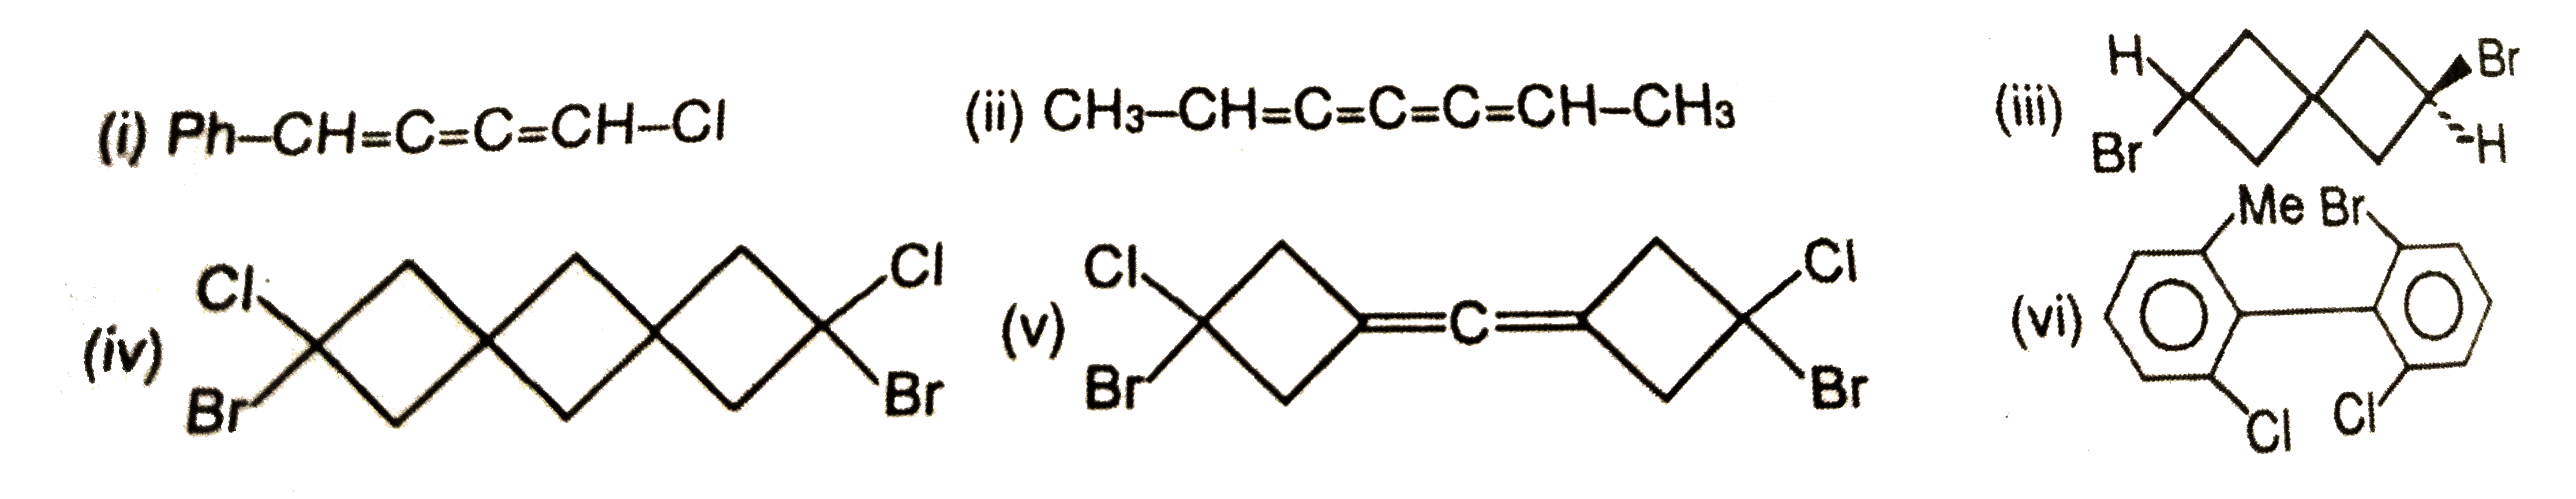 Which of the following are chiral molecules